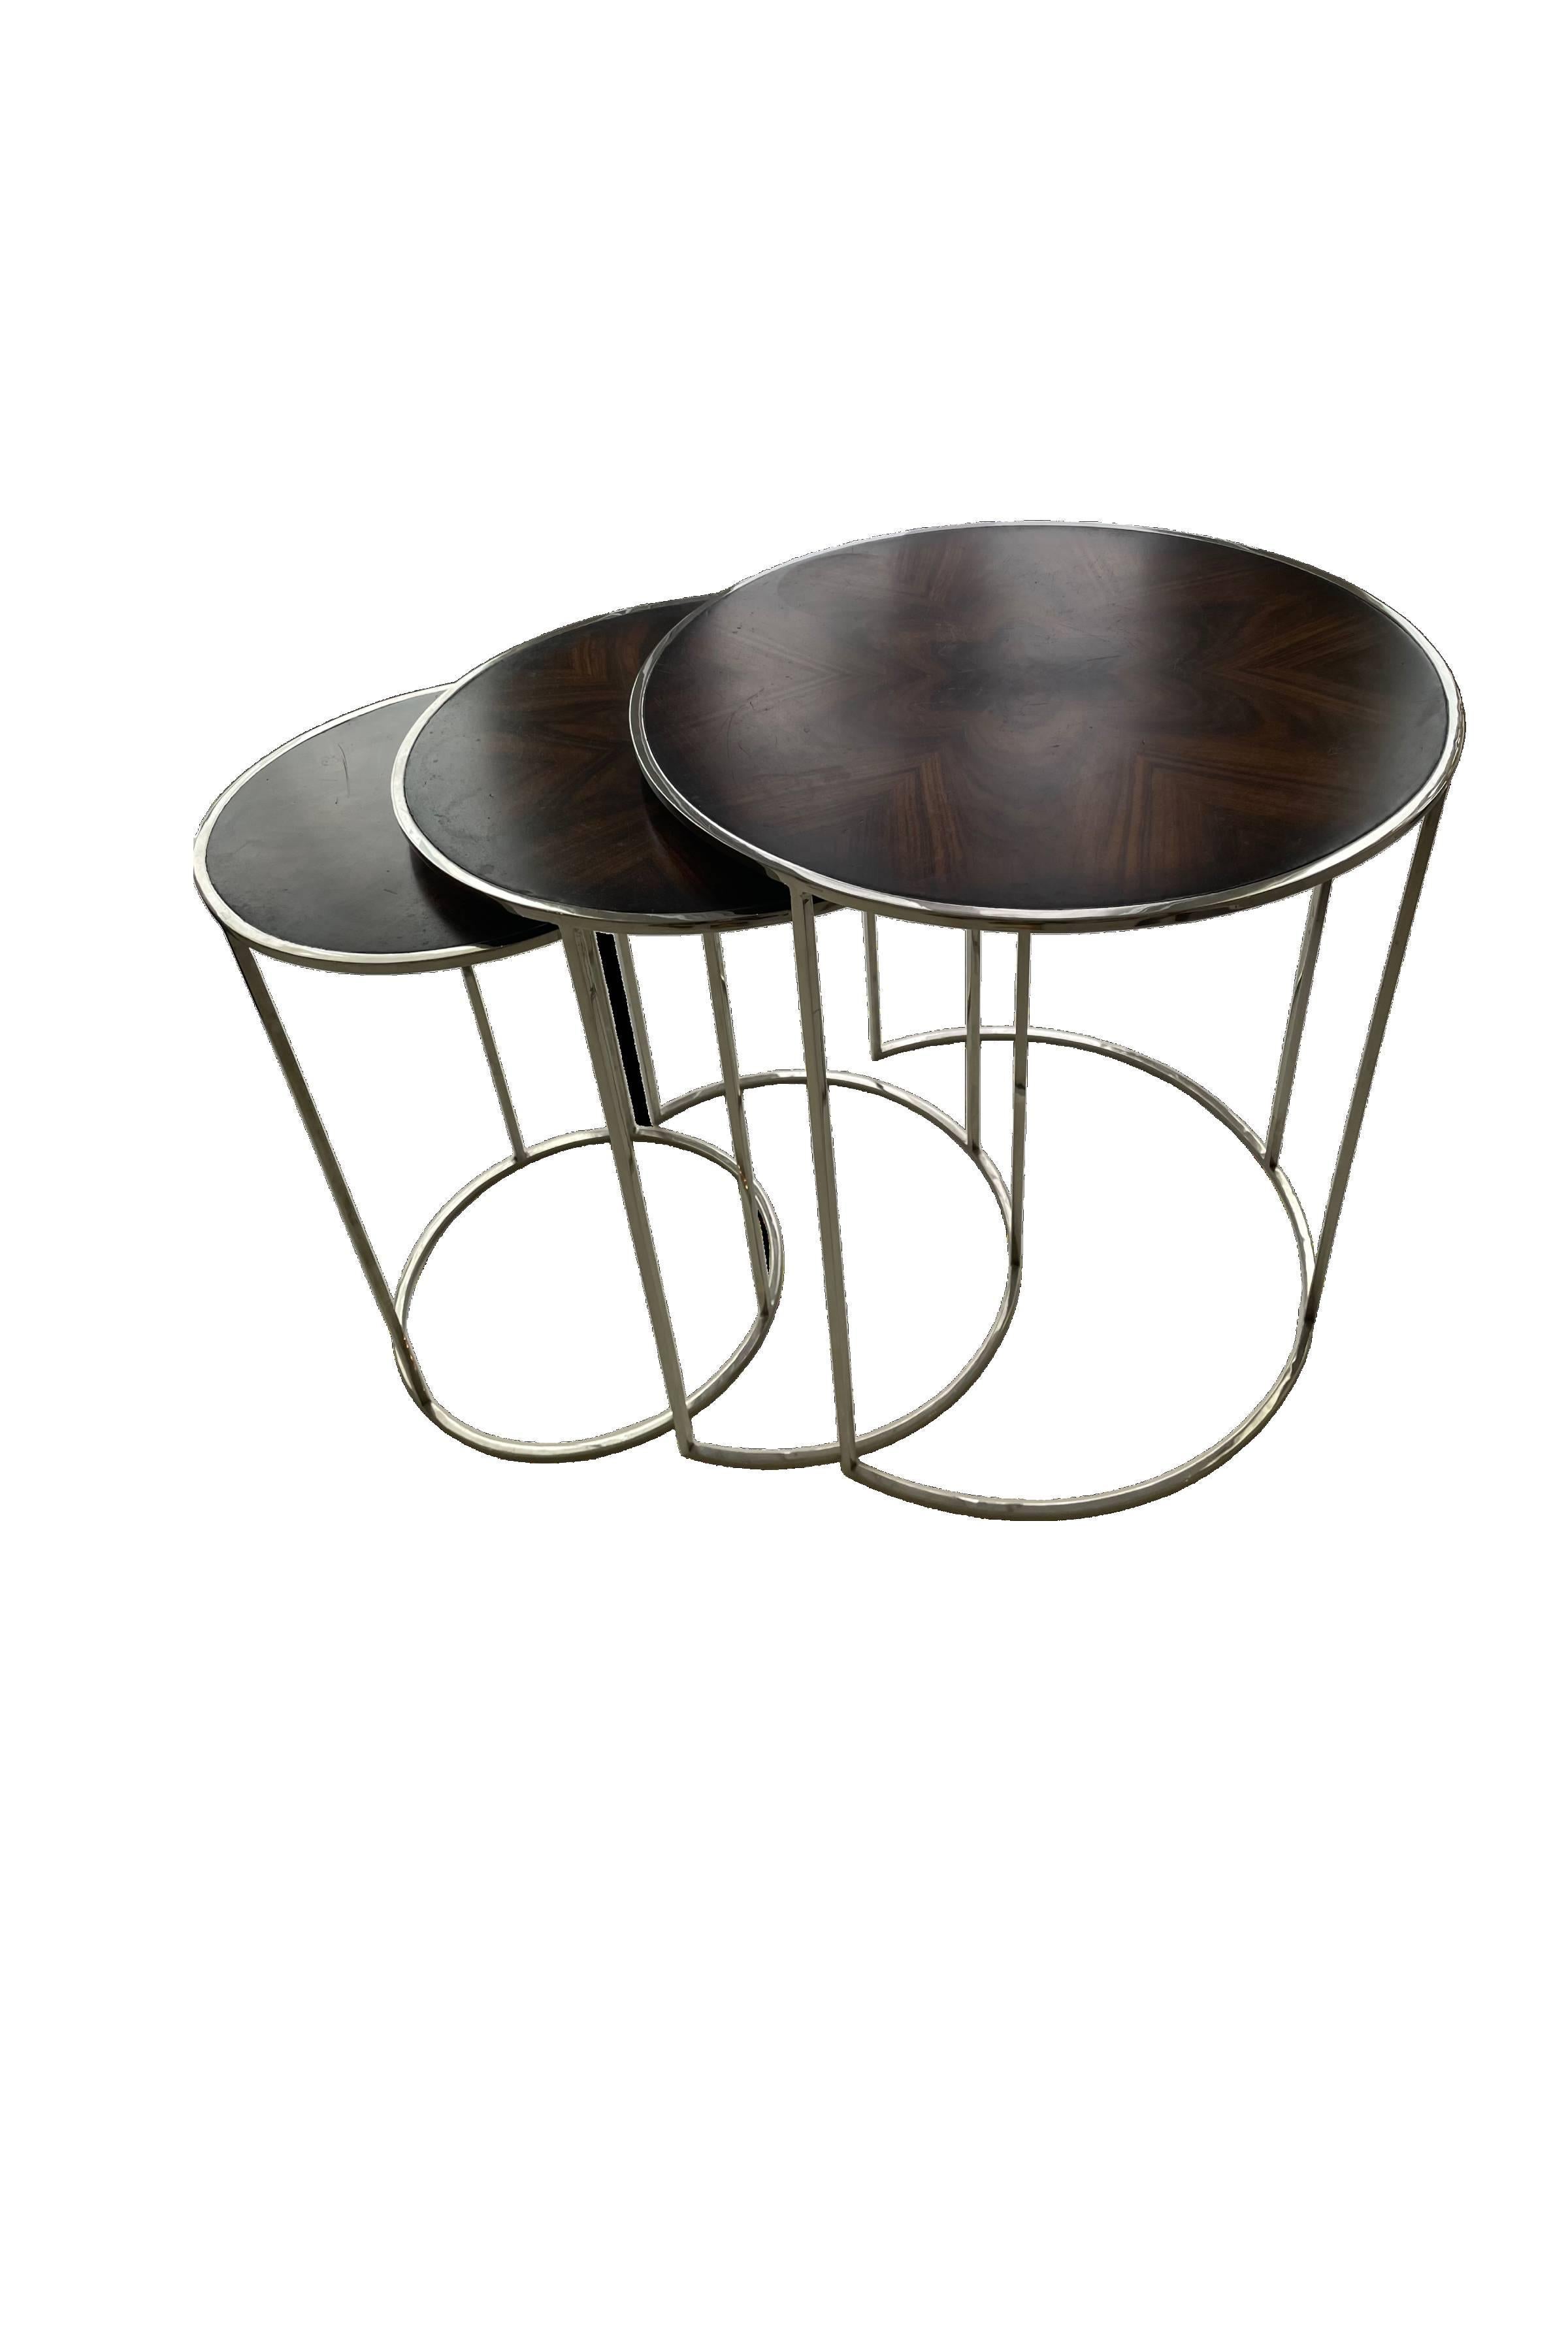 American Vintage Set of 3 Flame Mahogany/Chrome Nesting Tables For Sale